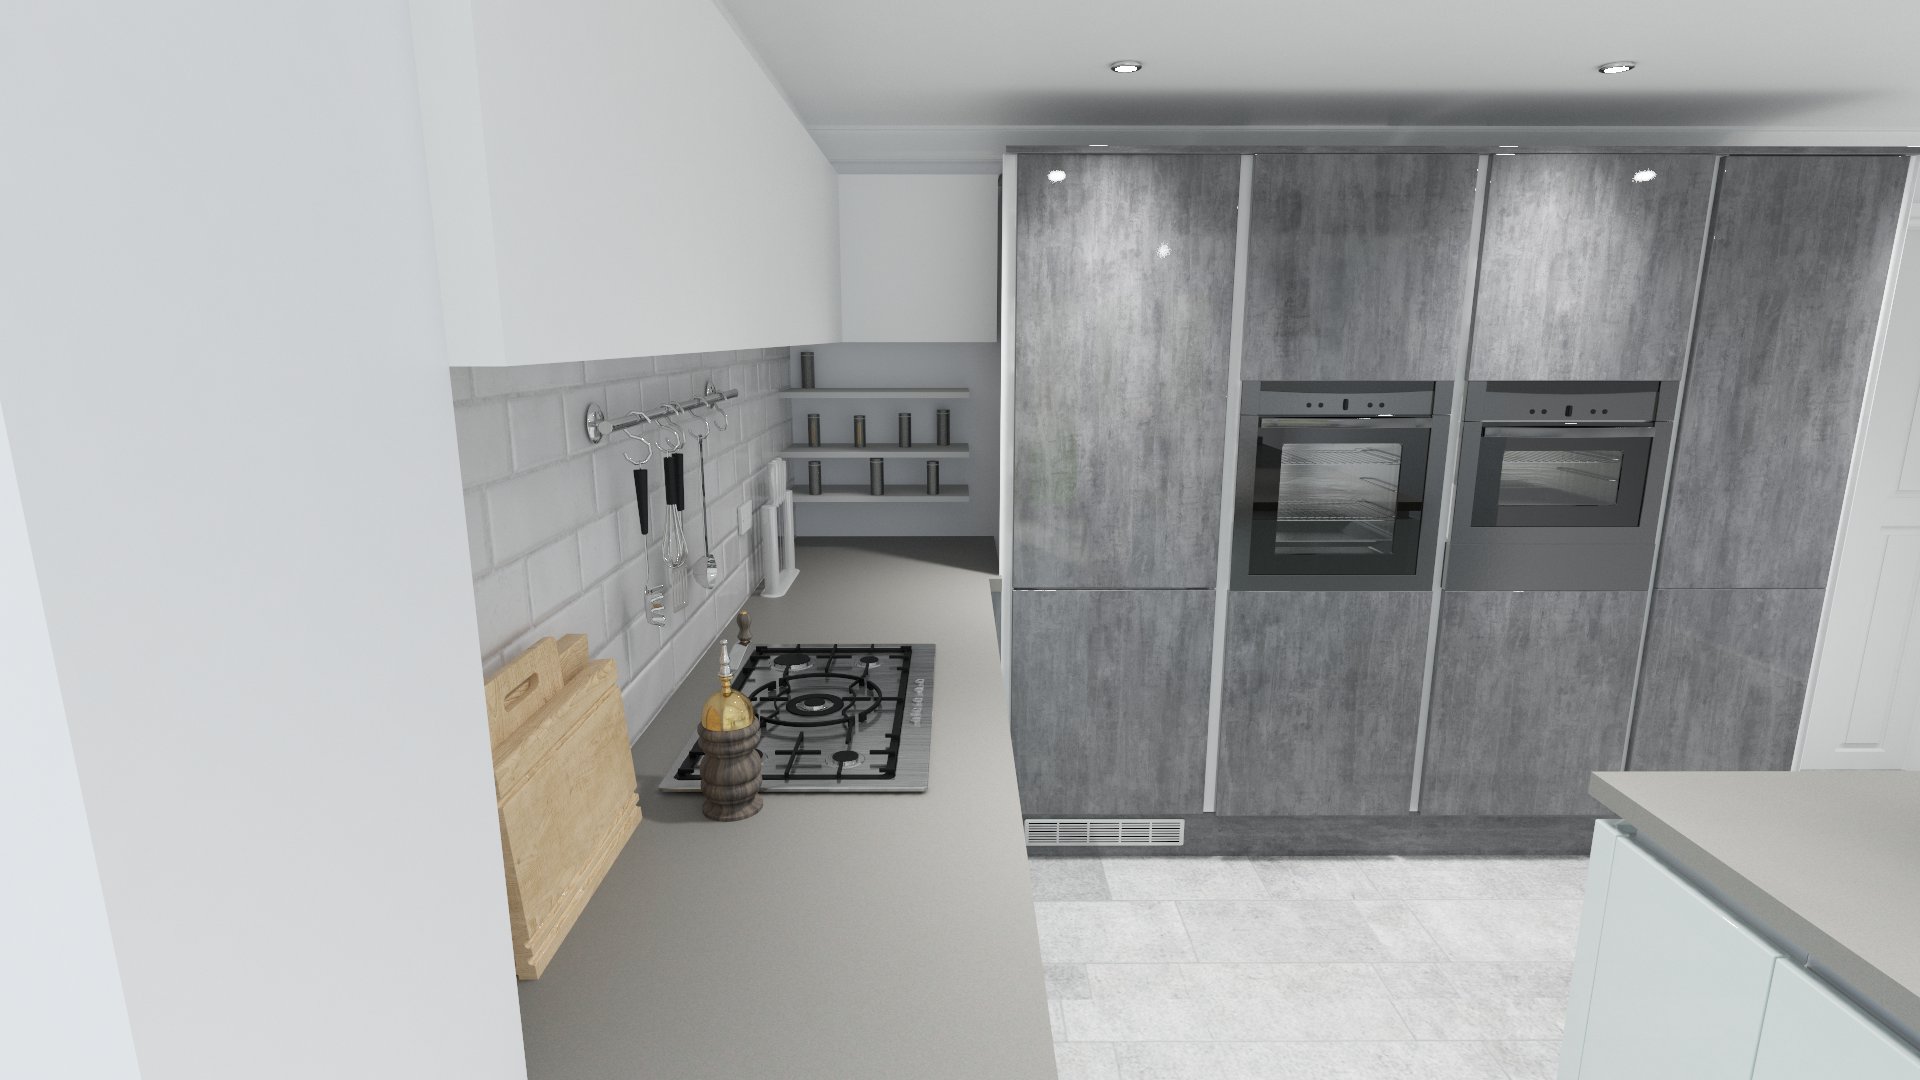 Kitchen preview image